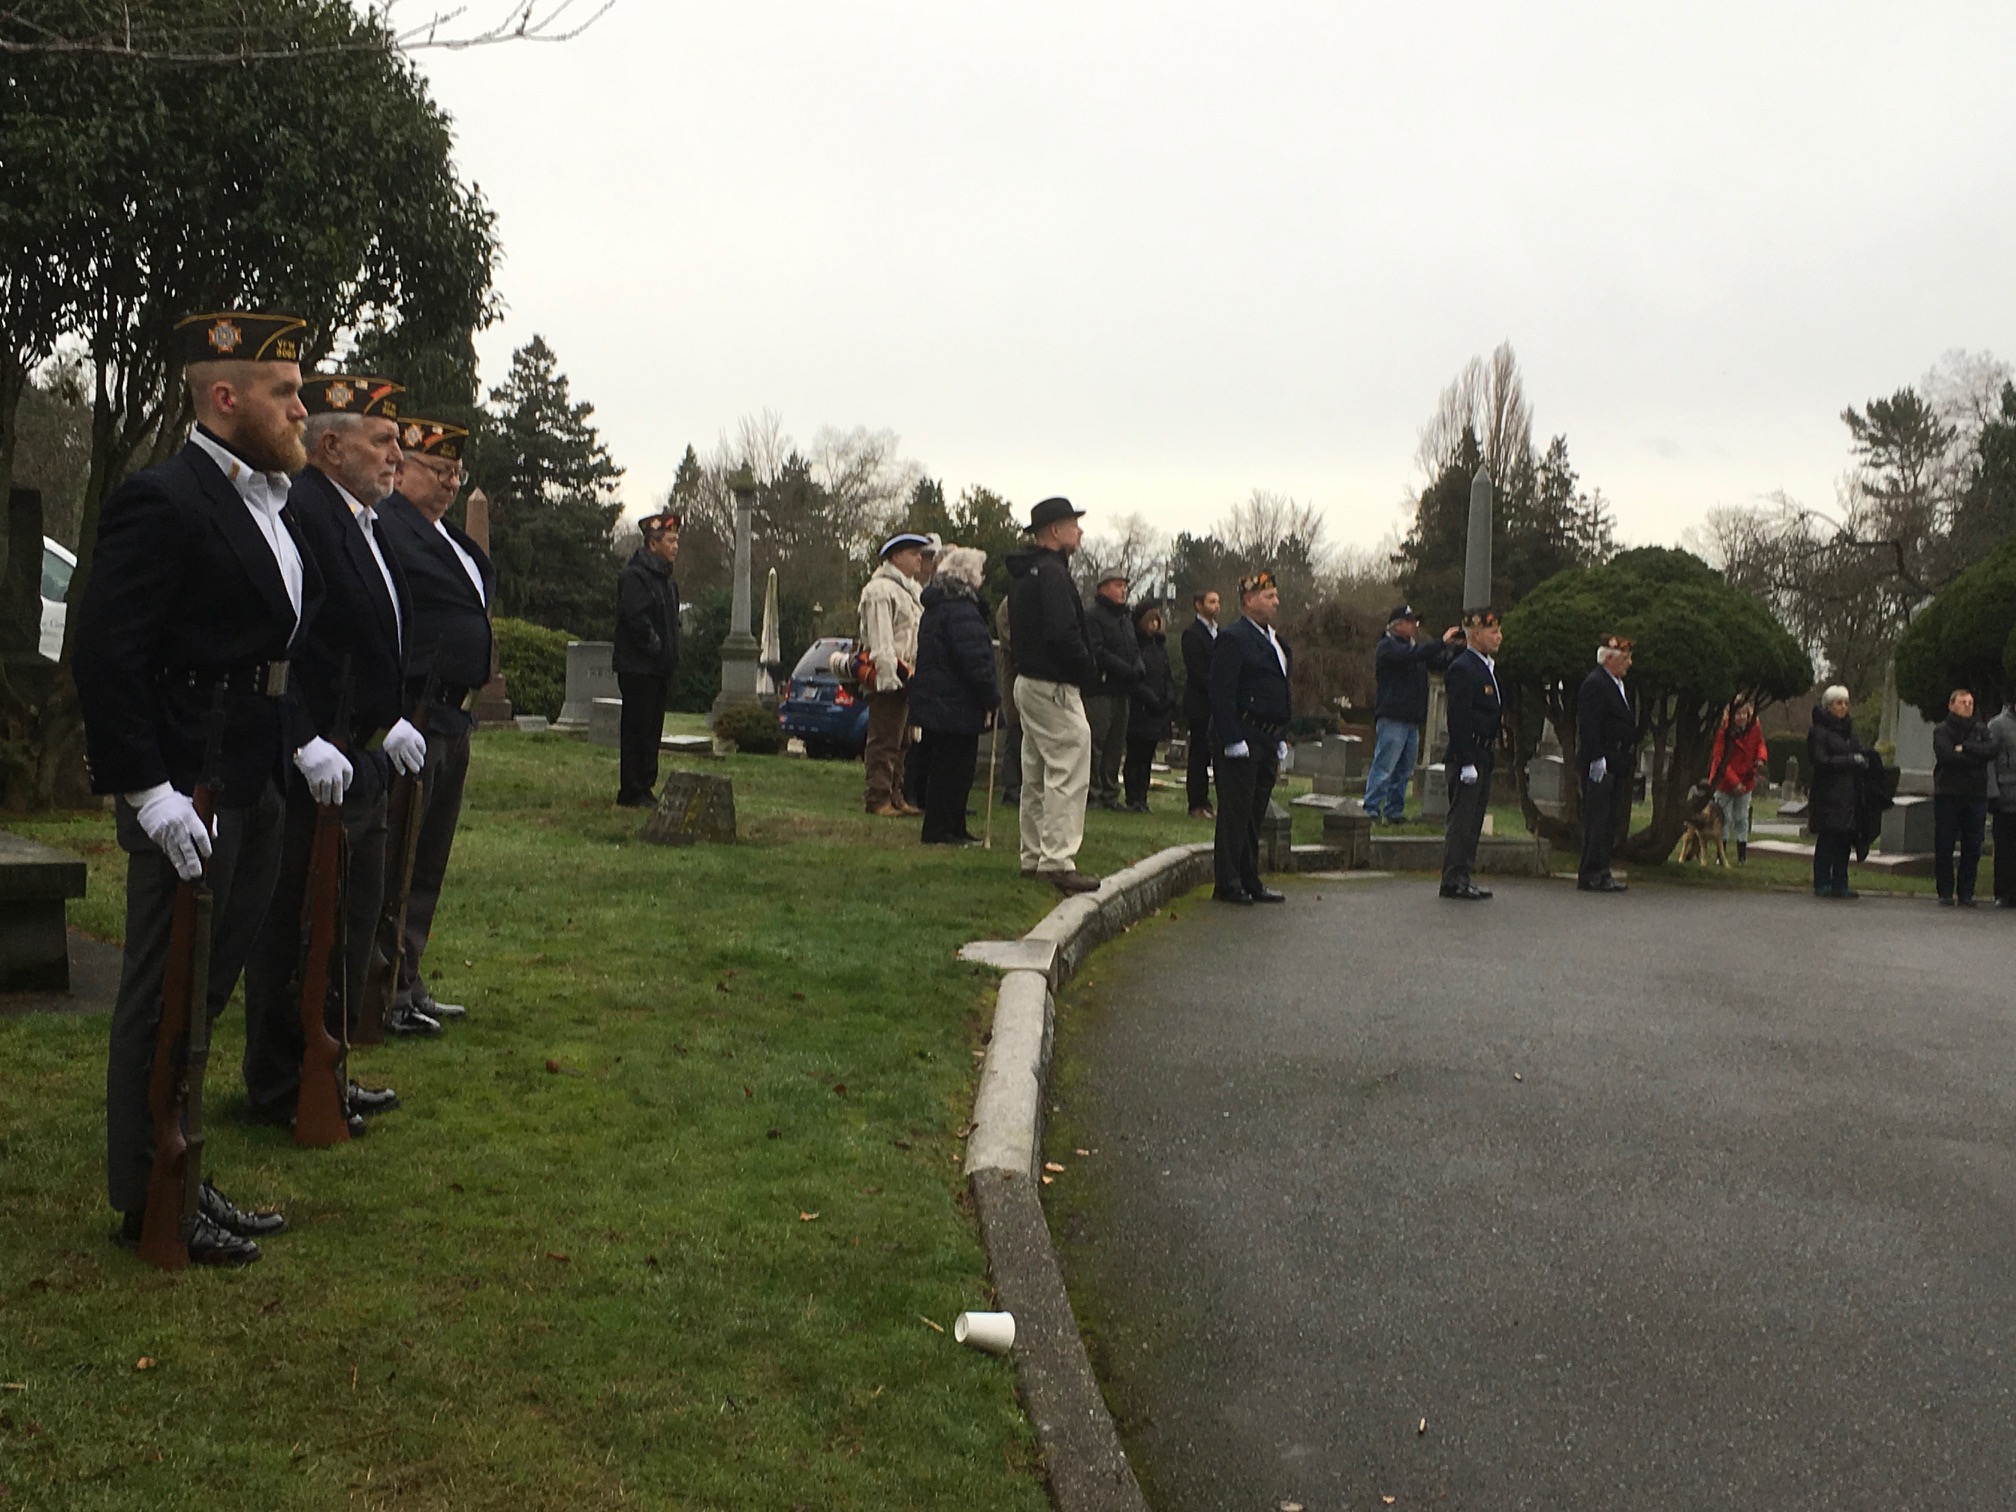 From left to right: Anthony Rose, Dan Stokke, Norm Limric, Joe Fitzgerald, Harold Rodenberger, and Bill Griffith participate in the Dec. 16 Wreaths Across America Memorial Service at Lakeview Cemetery in Seattle.